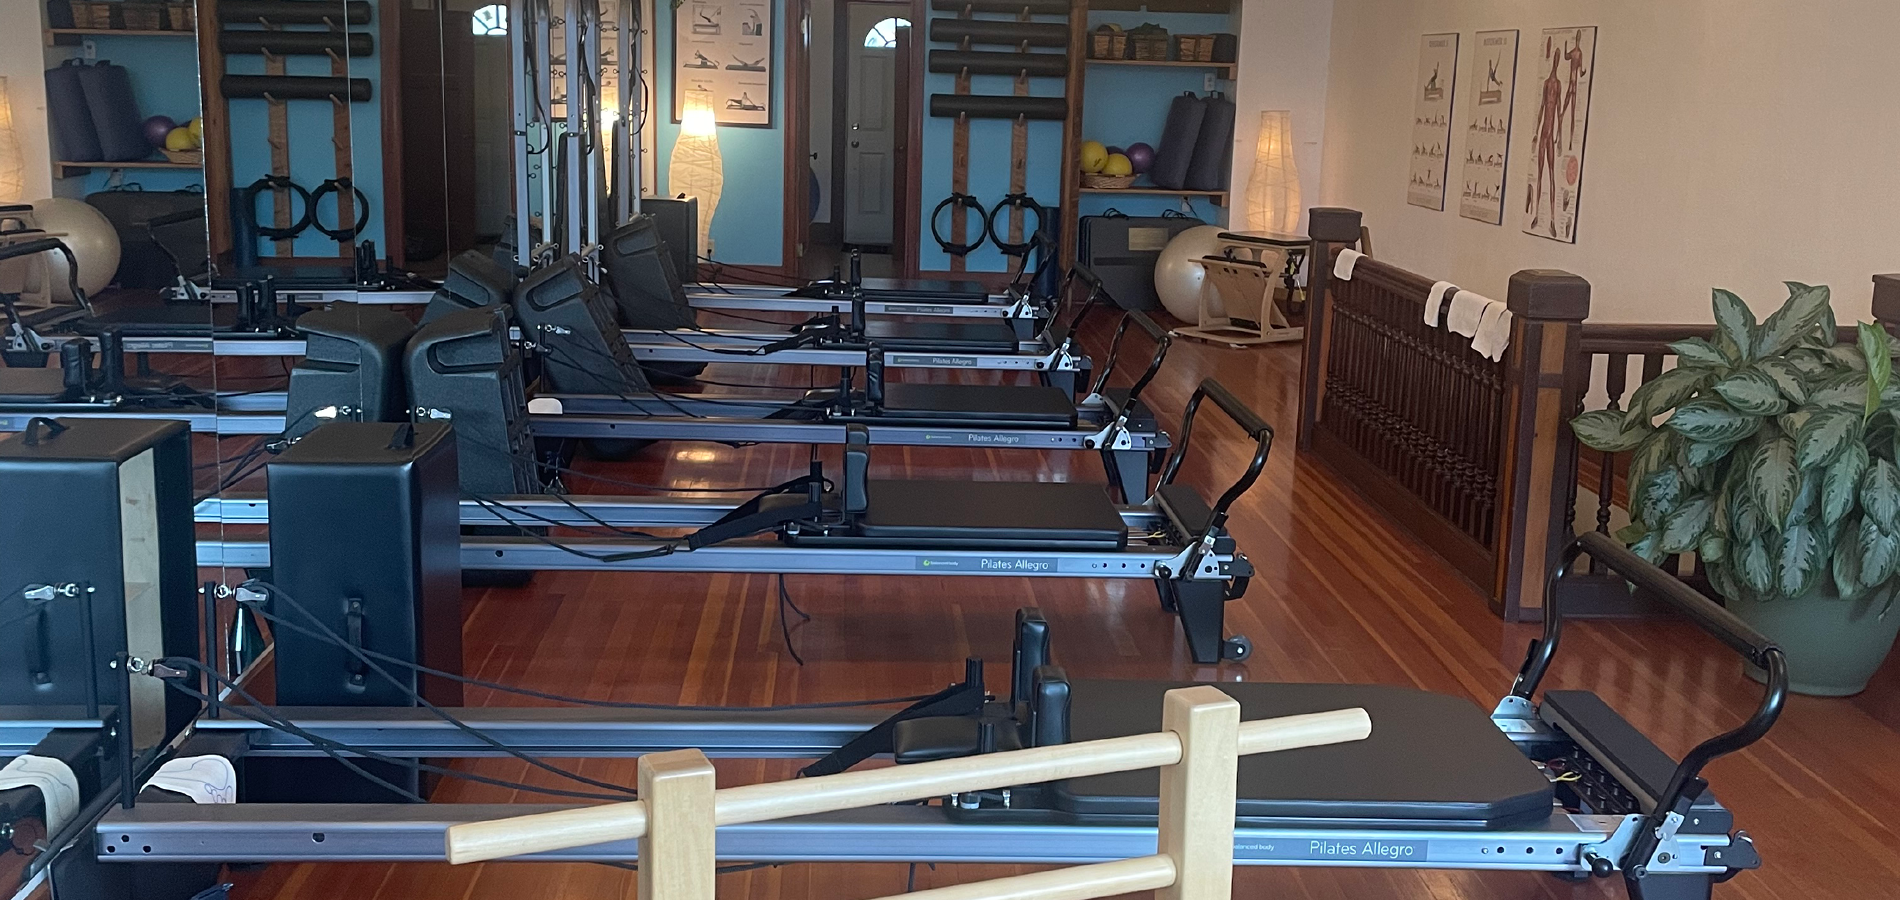 Work with the reformer